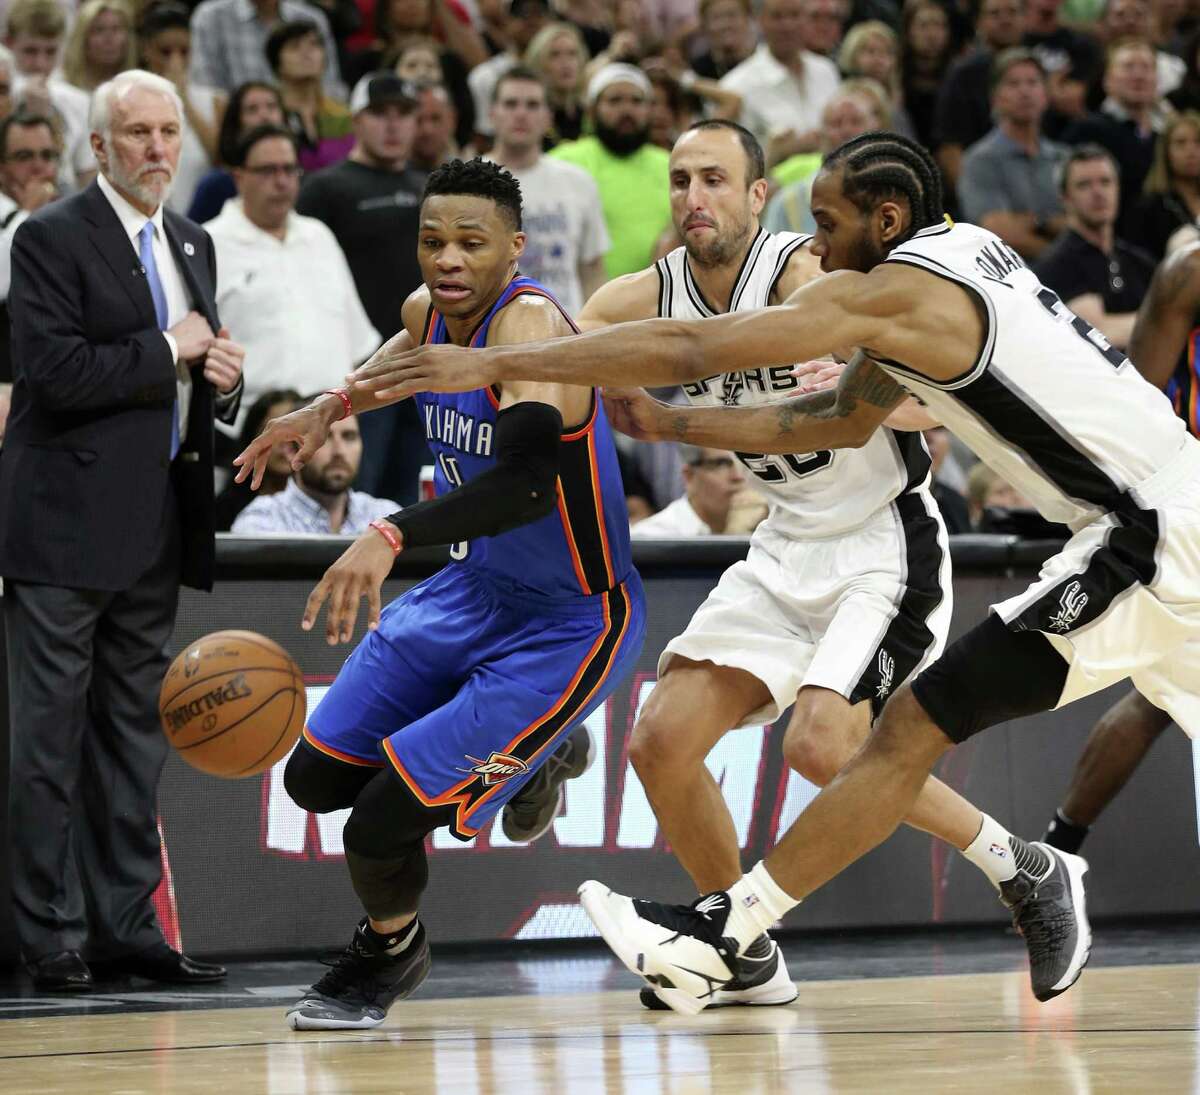 Manu Ginobili’s big paydays are coming to an end but Russell Westbrook, left, and Kawhi Leonard, battling here in a May 10, 2016 playoff game, are expected to receive enormous contracts in coming years.